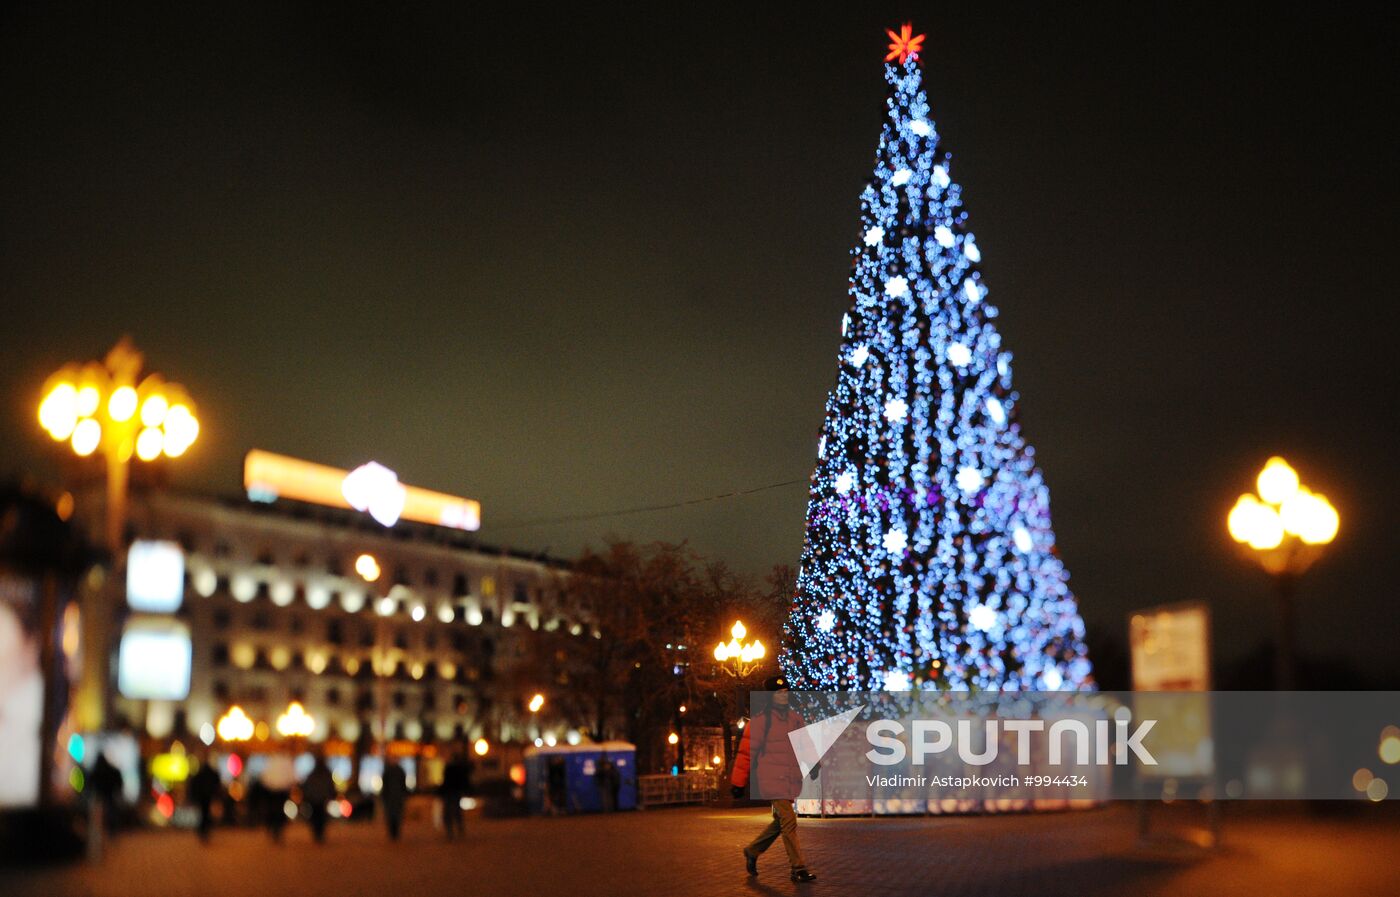 Moscow decorated for New Year celebrations